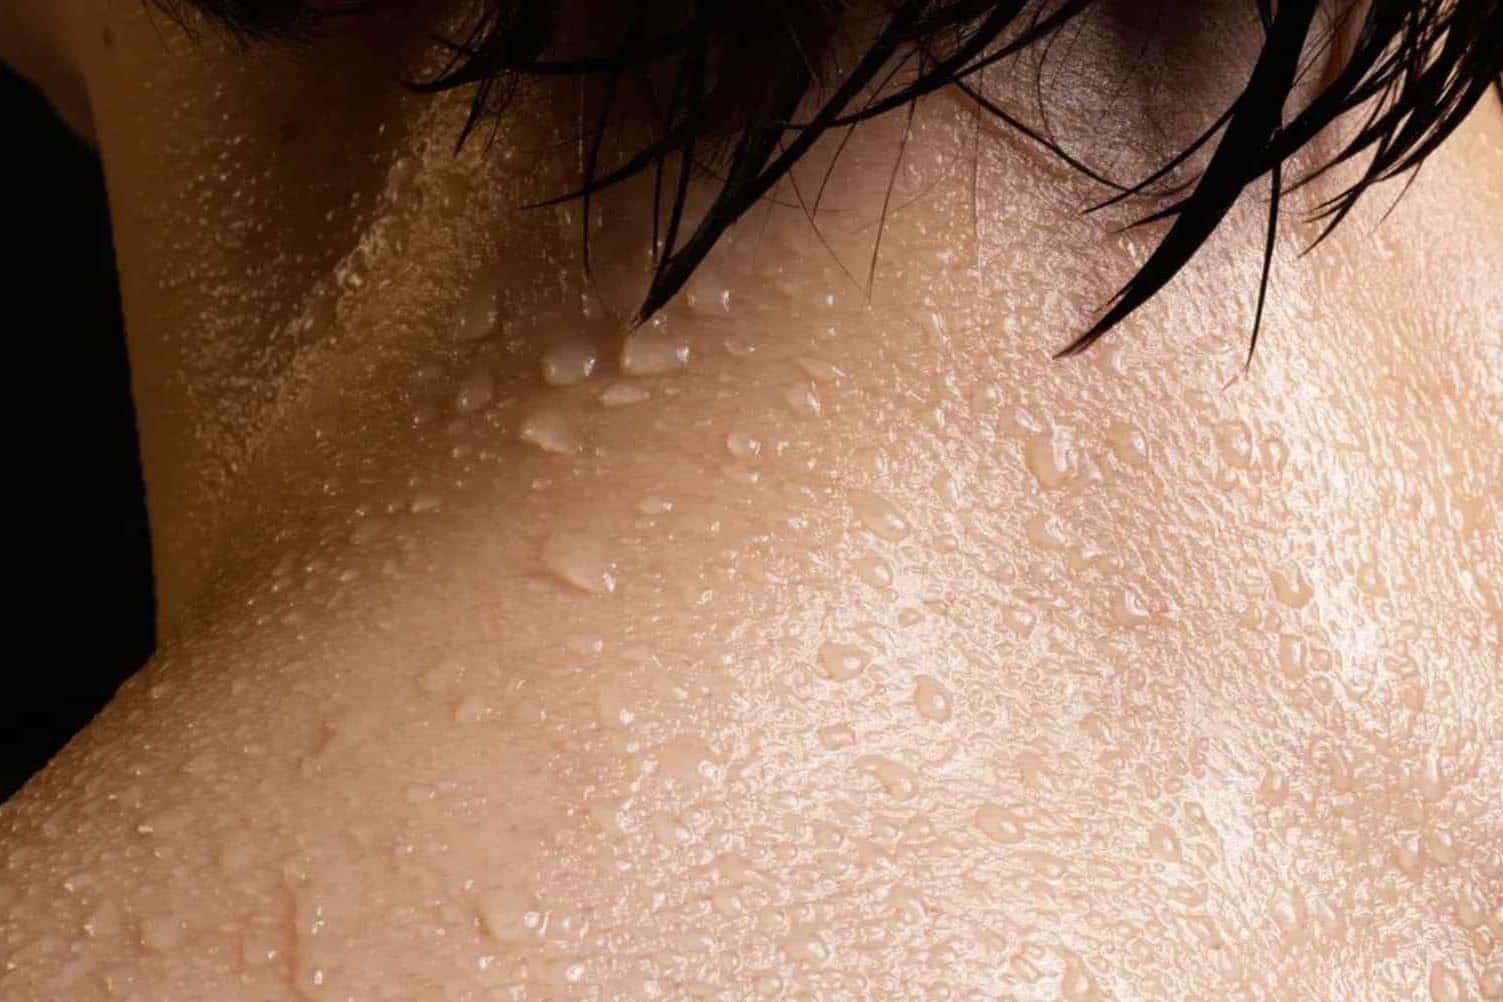 Alcohol Triggers Sweating